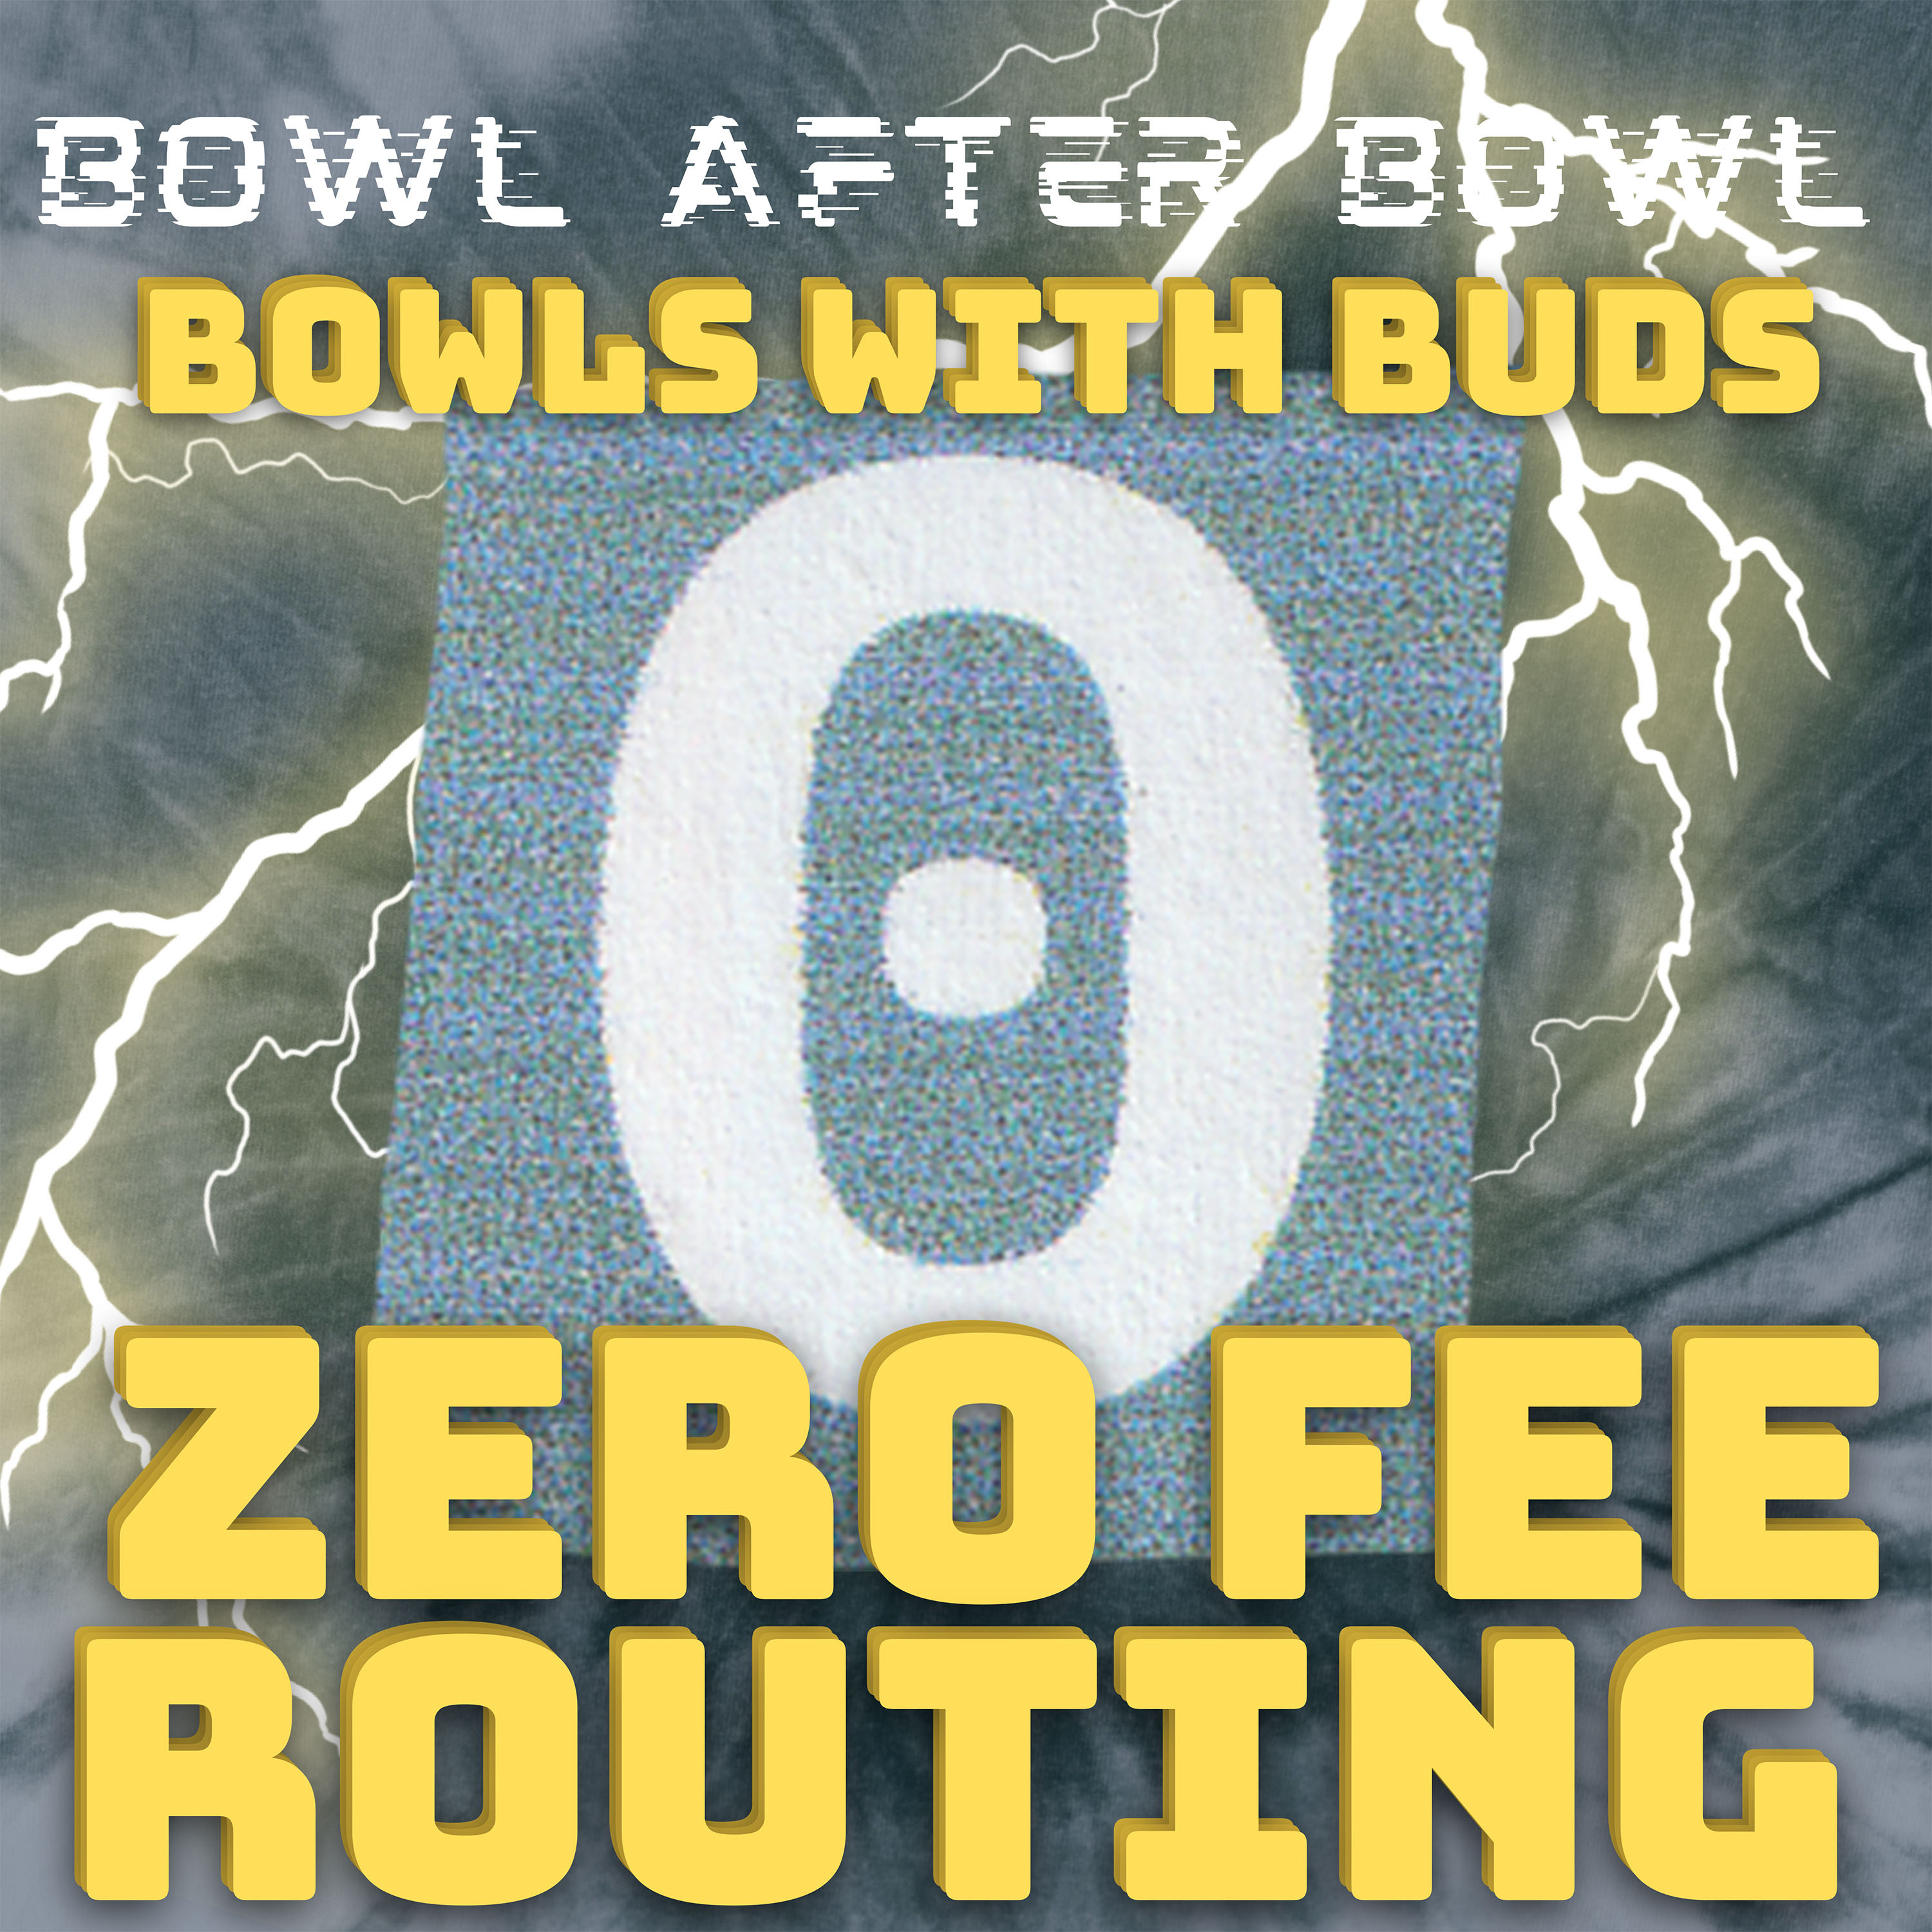 Episode 204 ★ Bowls With Buds ★ Zero Fee Routing